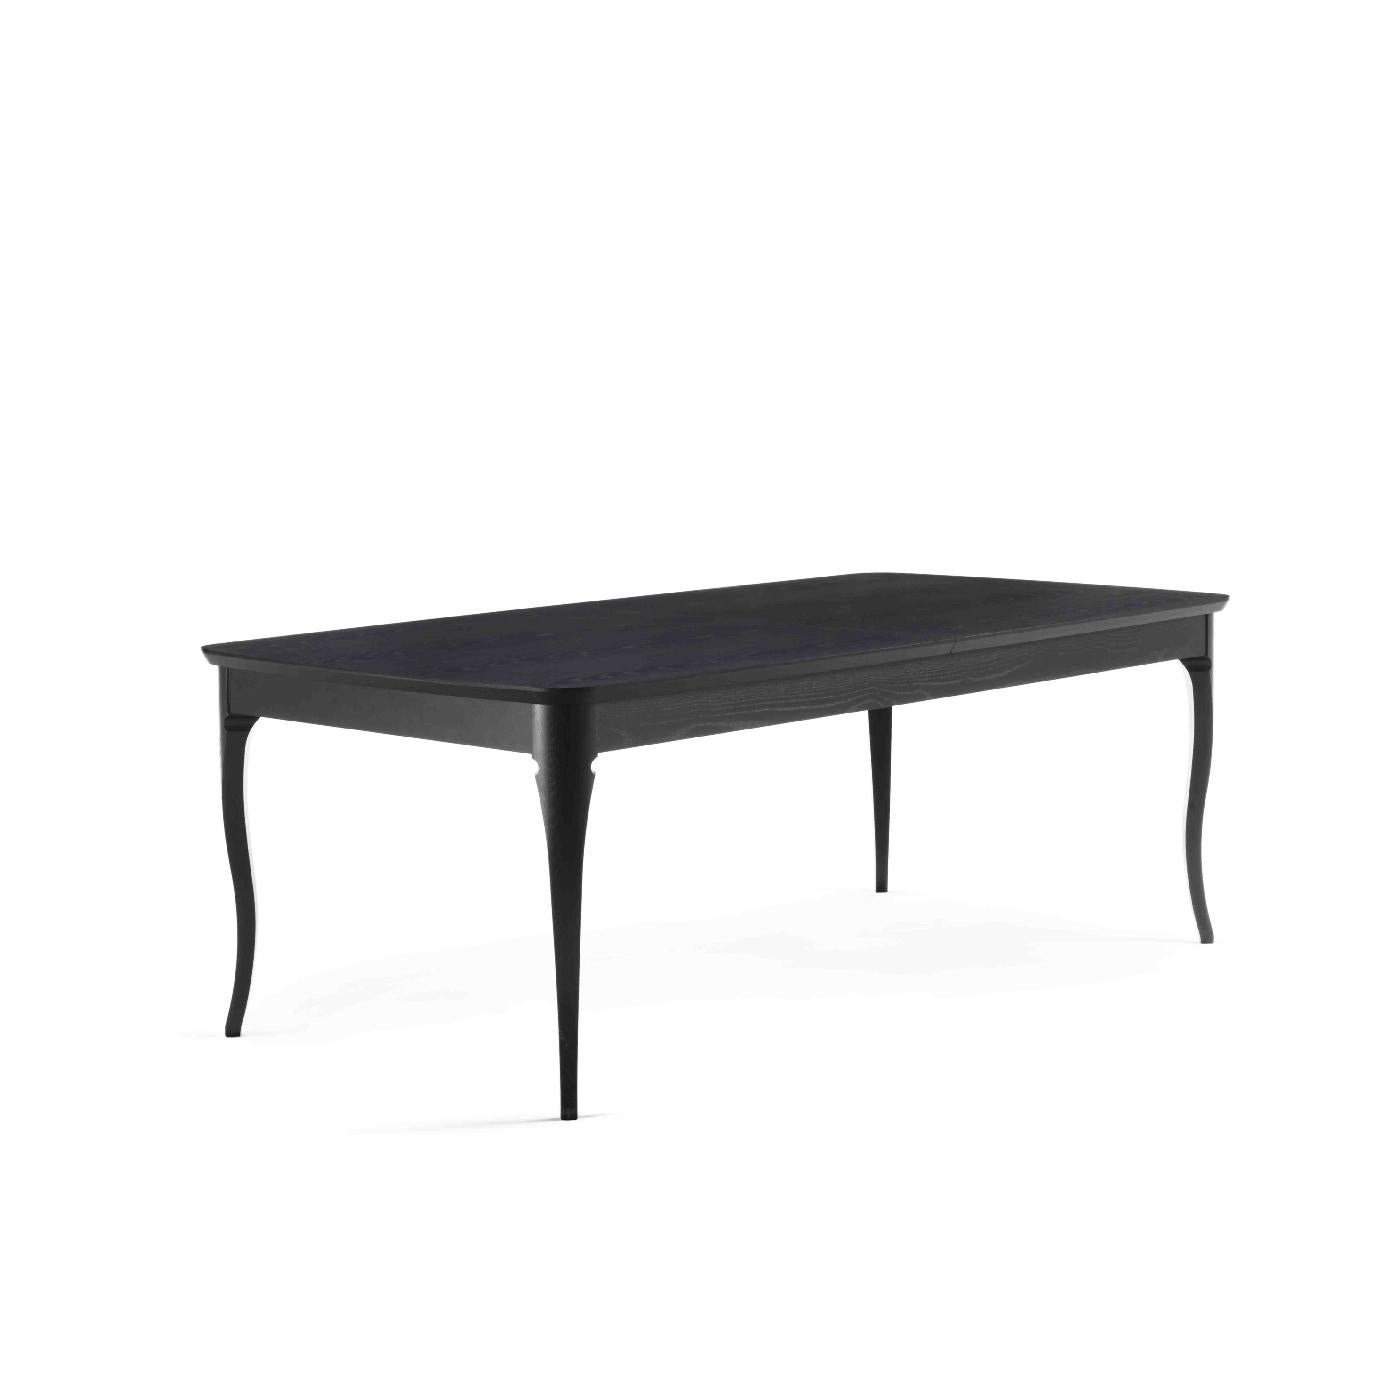 A harmonious balance of sculptural aesthetic and functionality, this dining table is handcrafted of wood with an ash veneer and ebonized finish and boasts a rectangular top raised on a base of cabriole-style legs inserted in the solid wood recessed